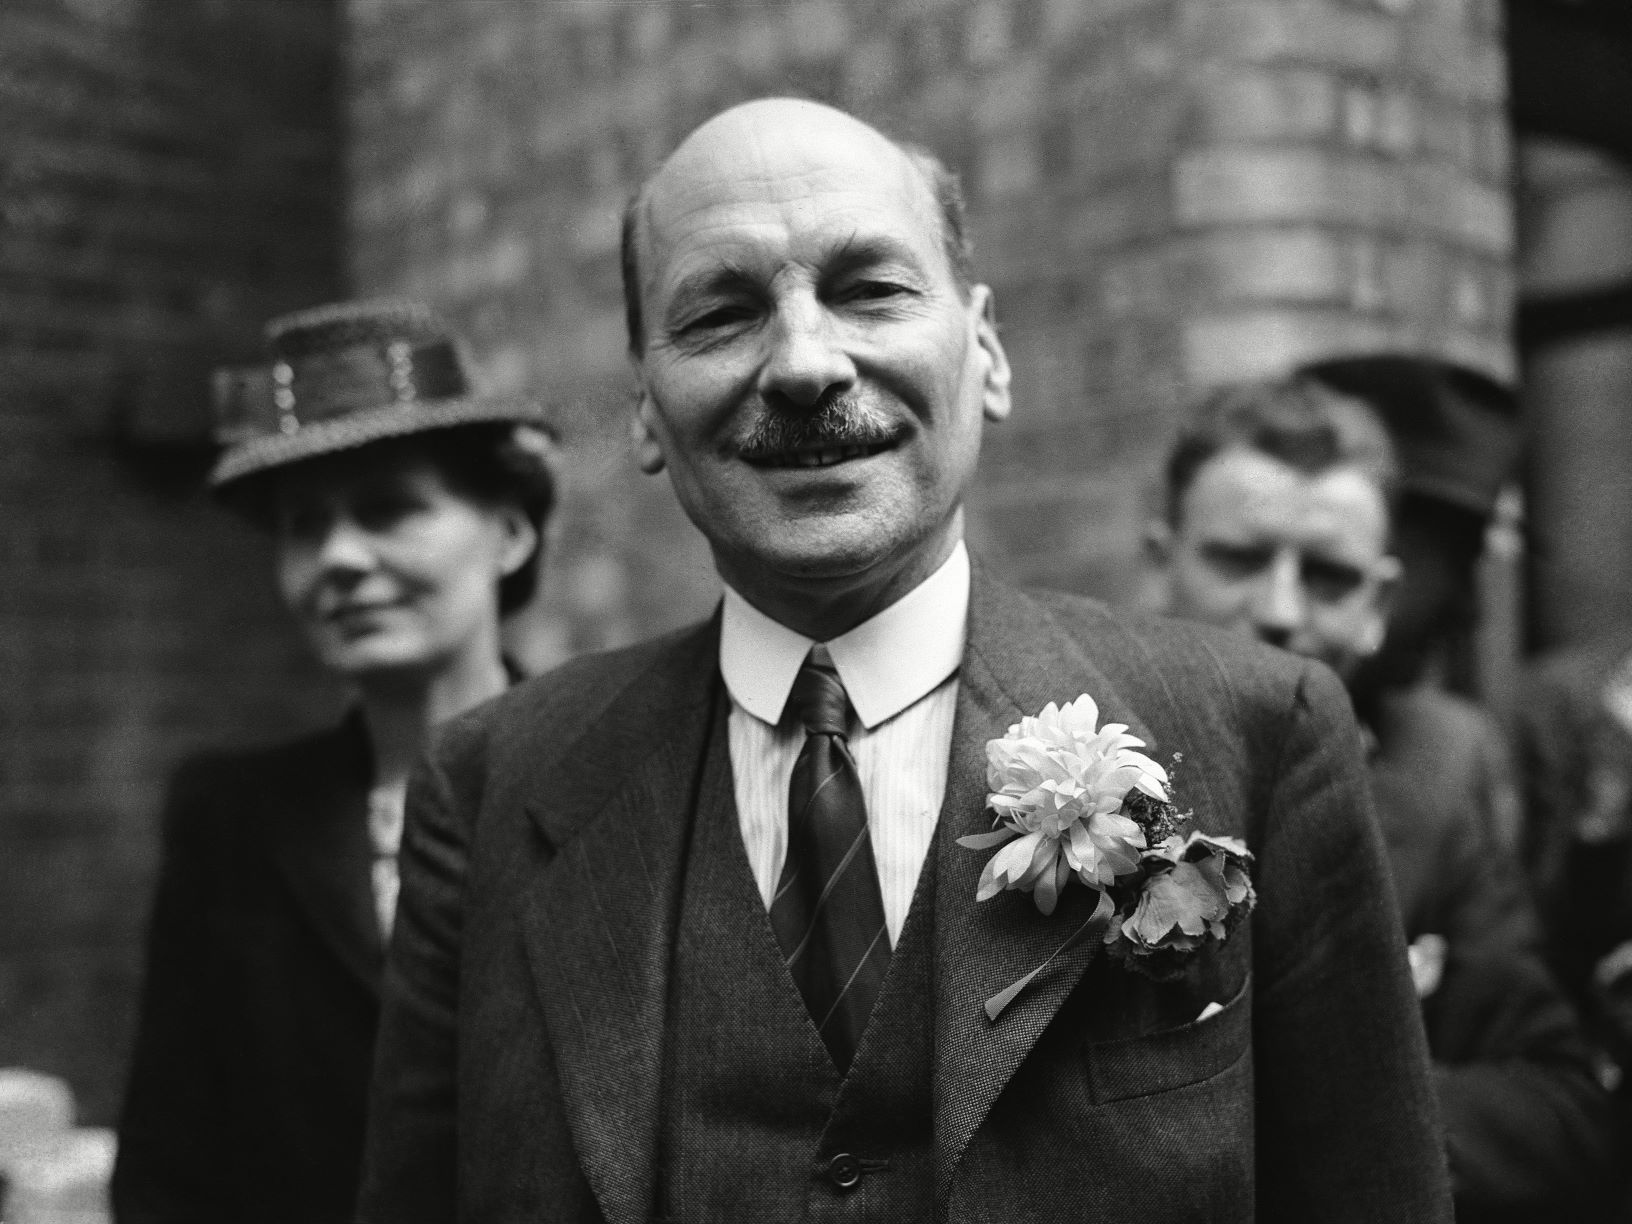 Labour Party leader Clement Attlee